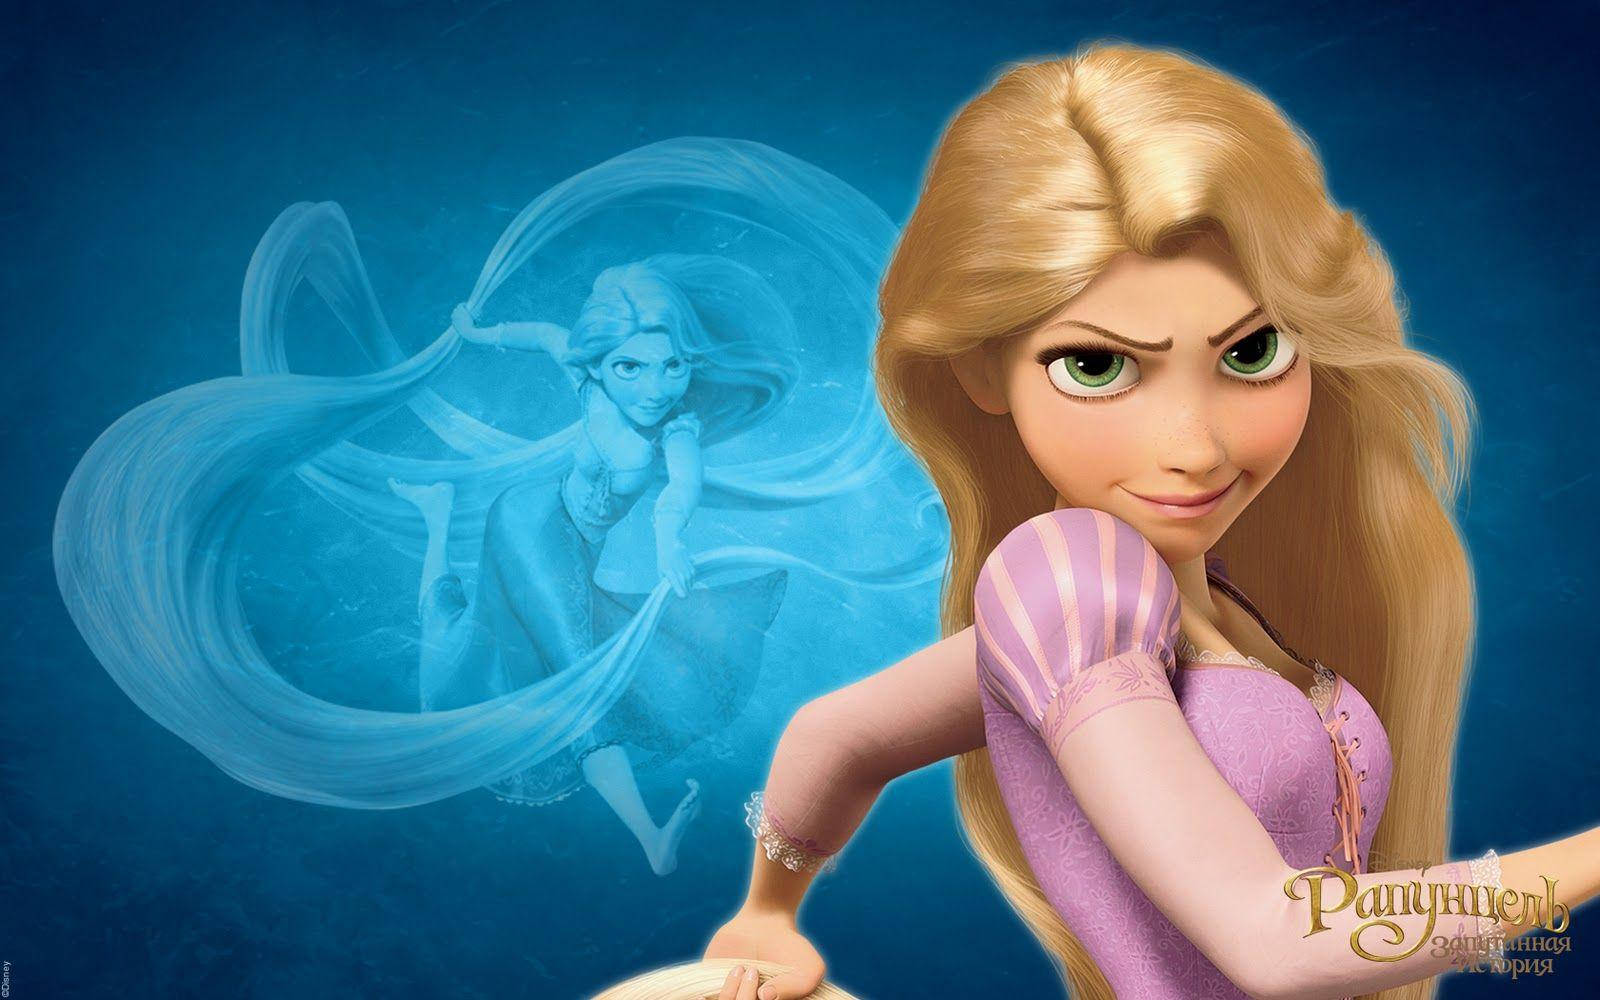 Free Tangled Wallpaper Downloads, [100+] Tangled Wallpapers for FREE |  